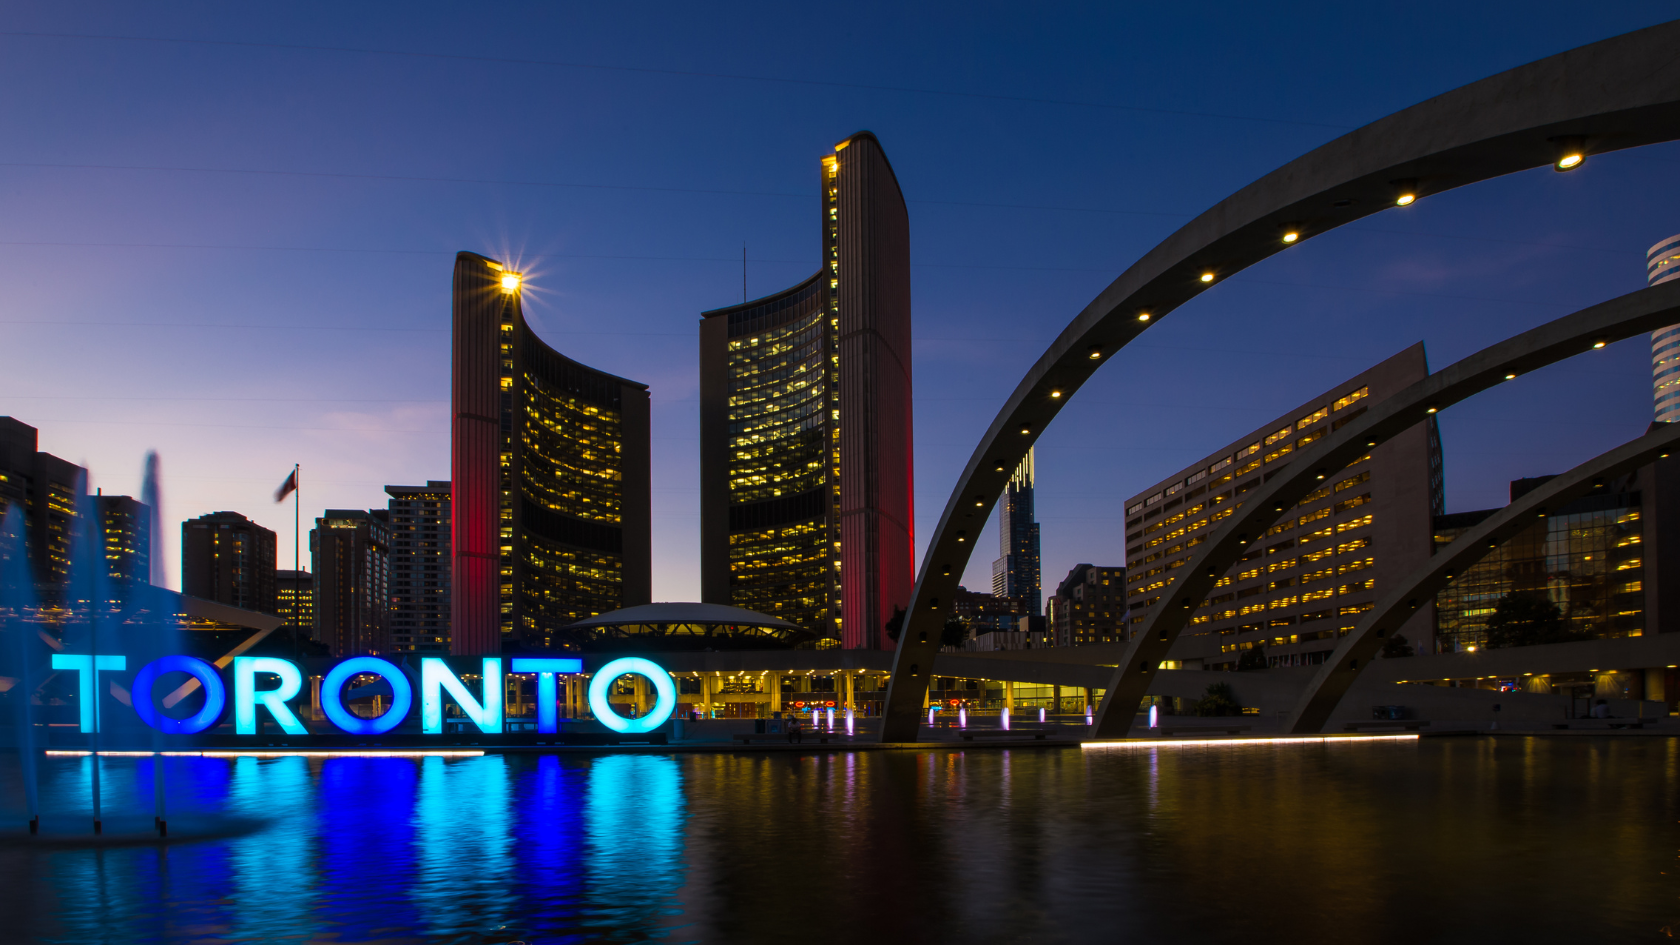 Toronto is a popular destination for those visiting Canada on vacation